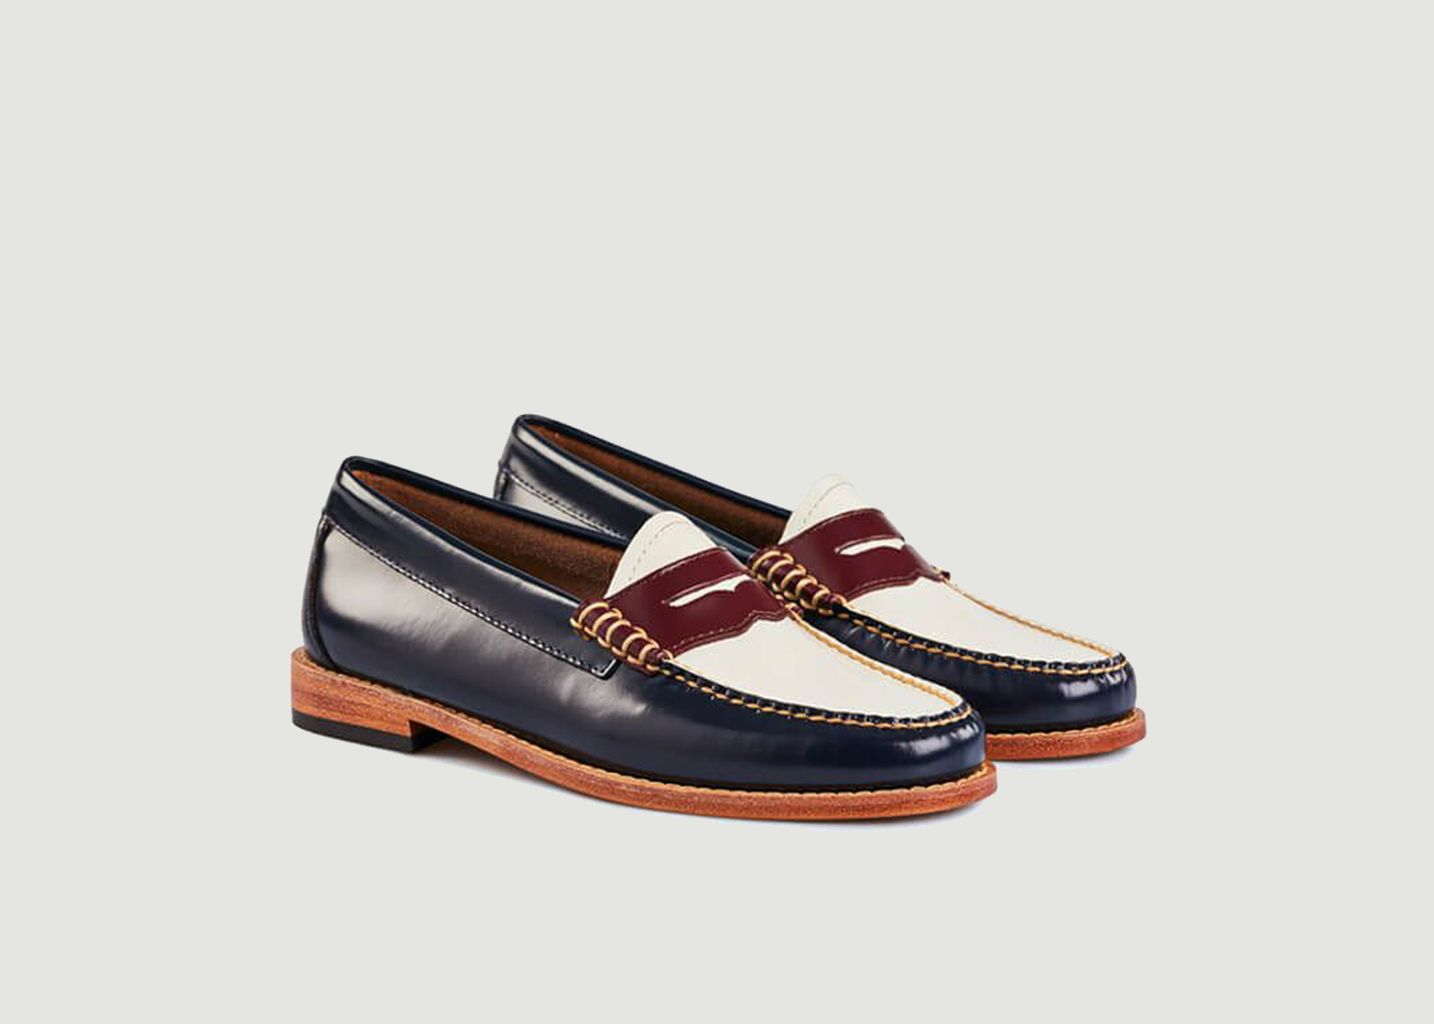 Weejuns Penny Tricolour Loafers - G.H.Bass